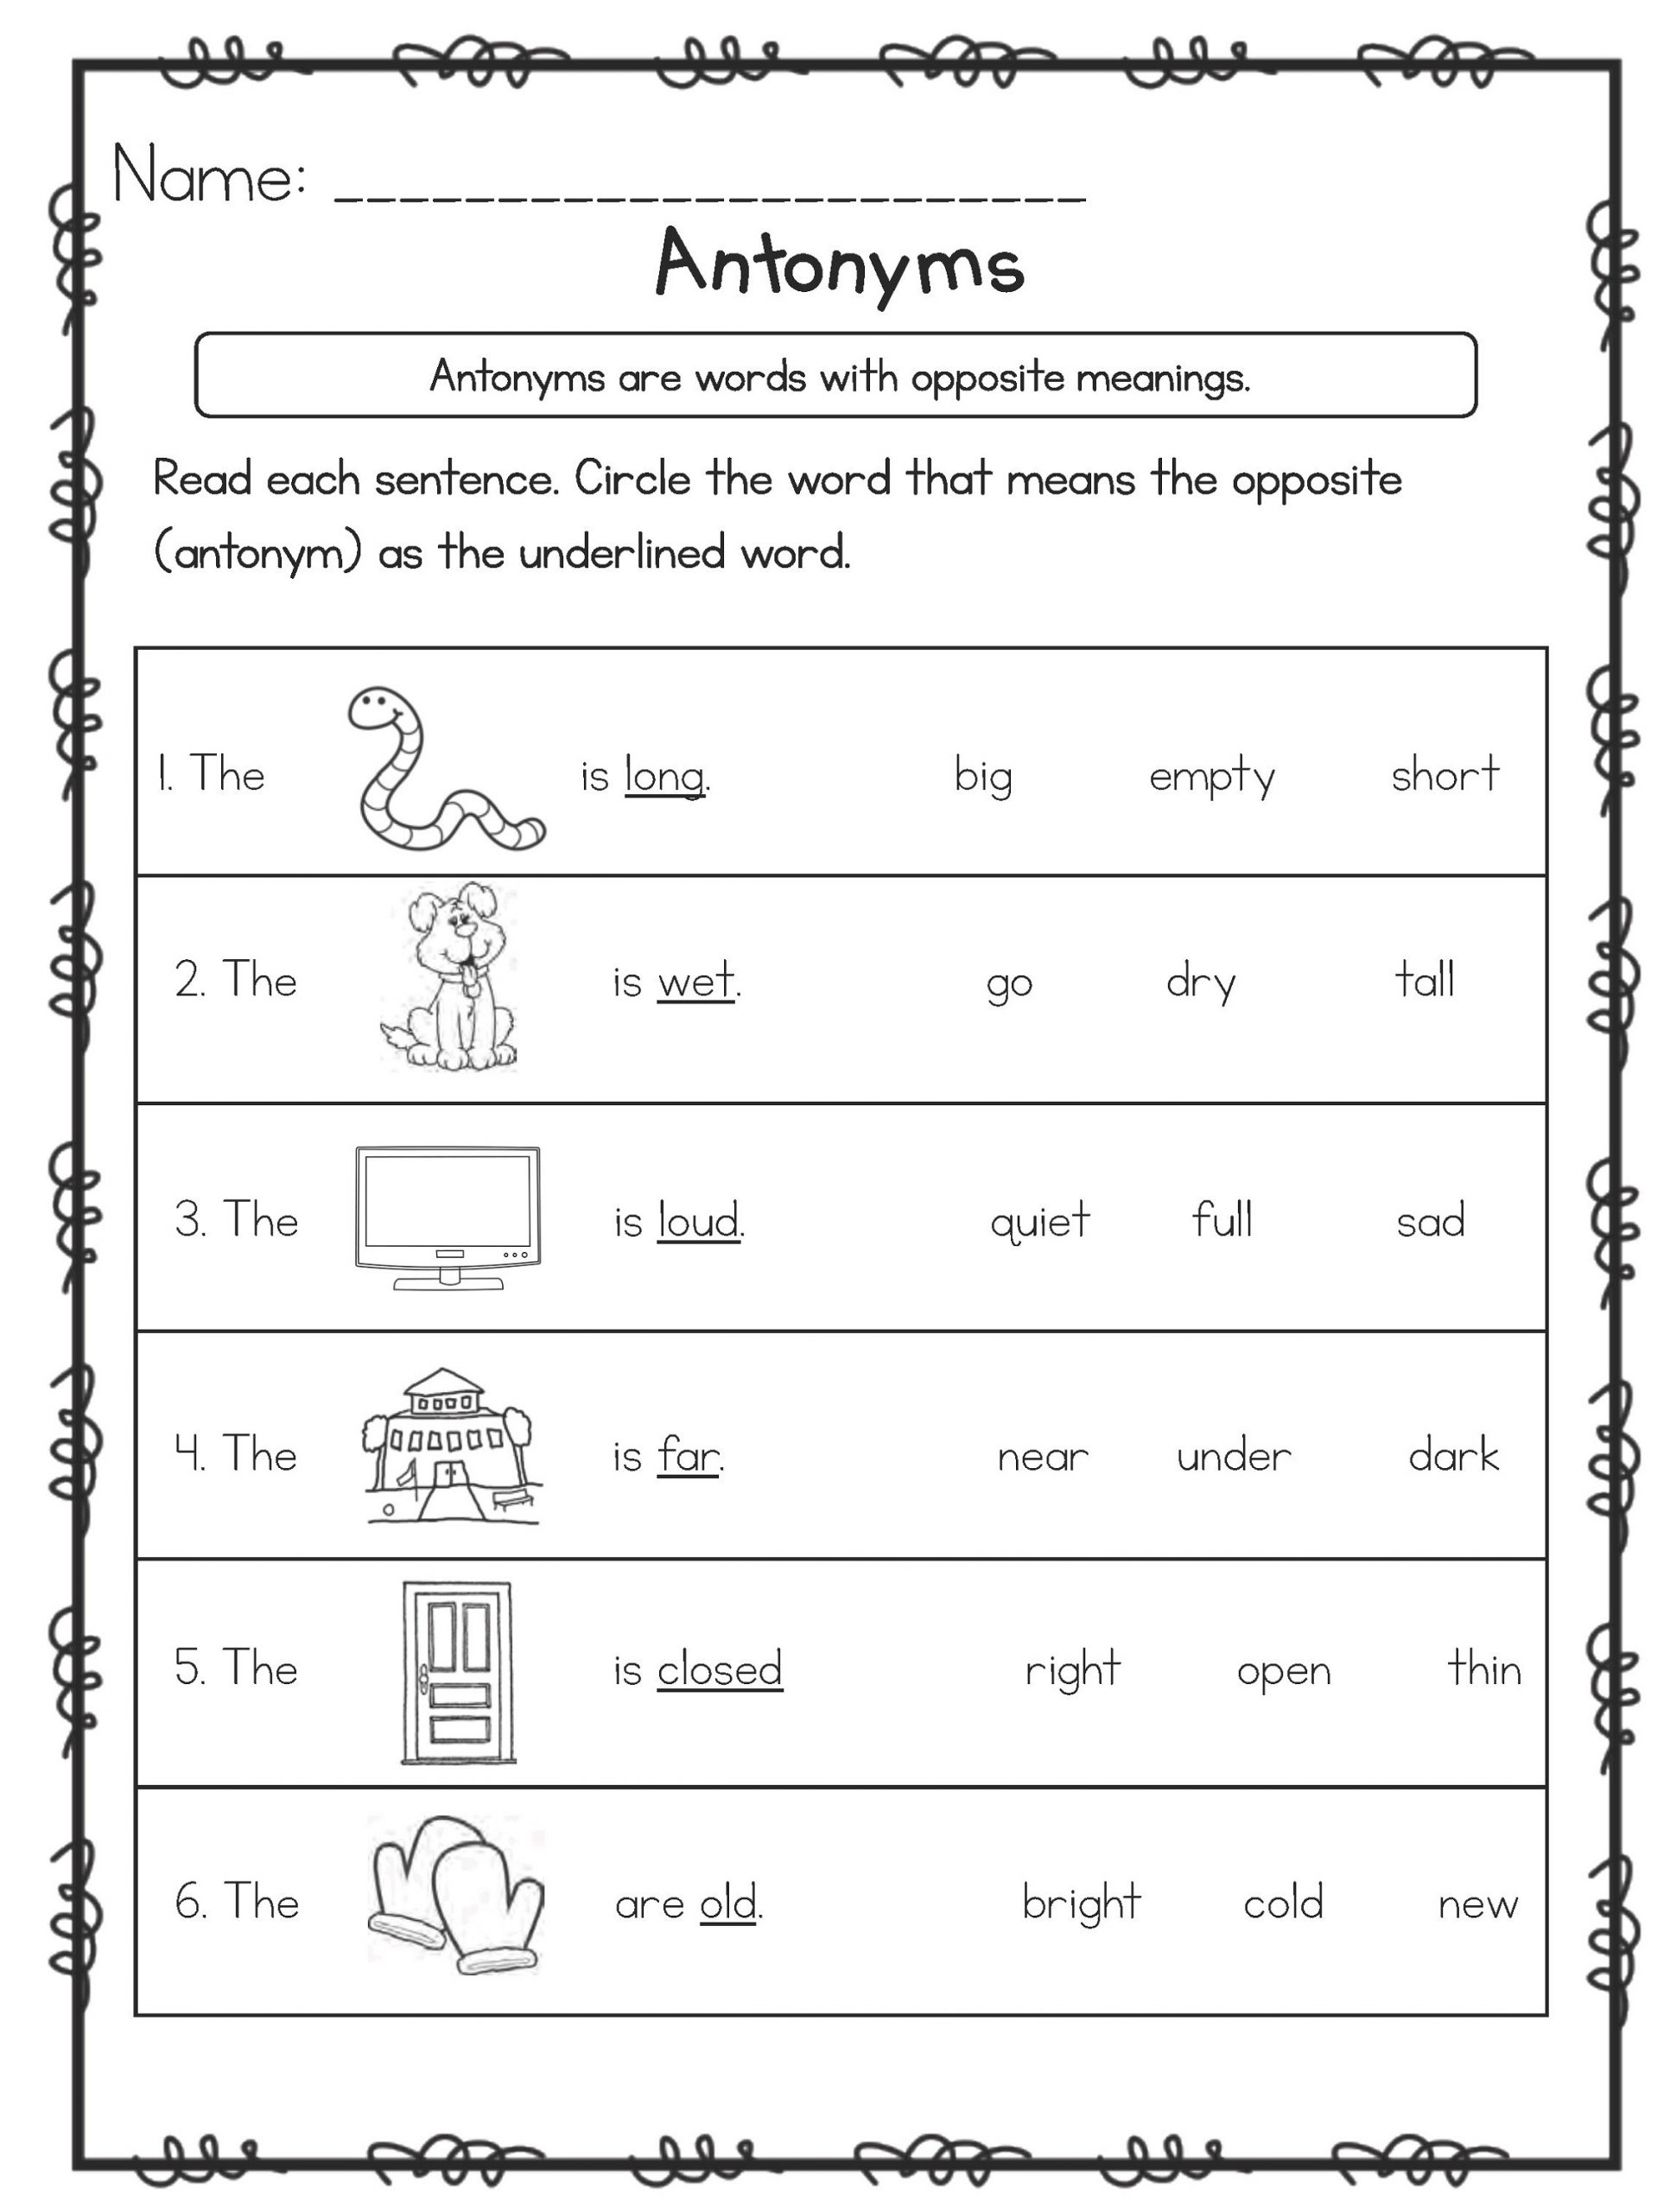 free-worksheets-for-5-year-olds-101-activity